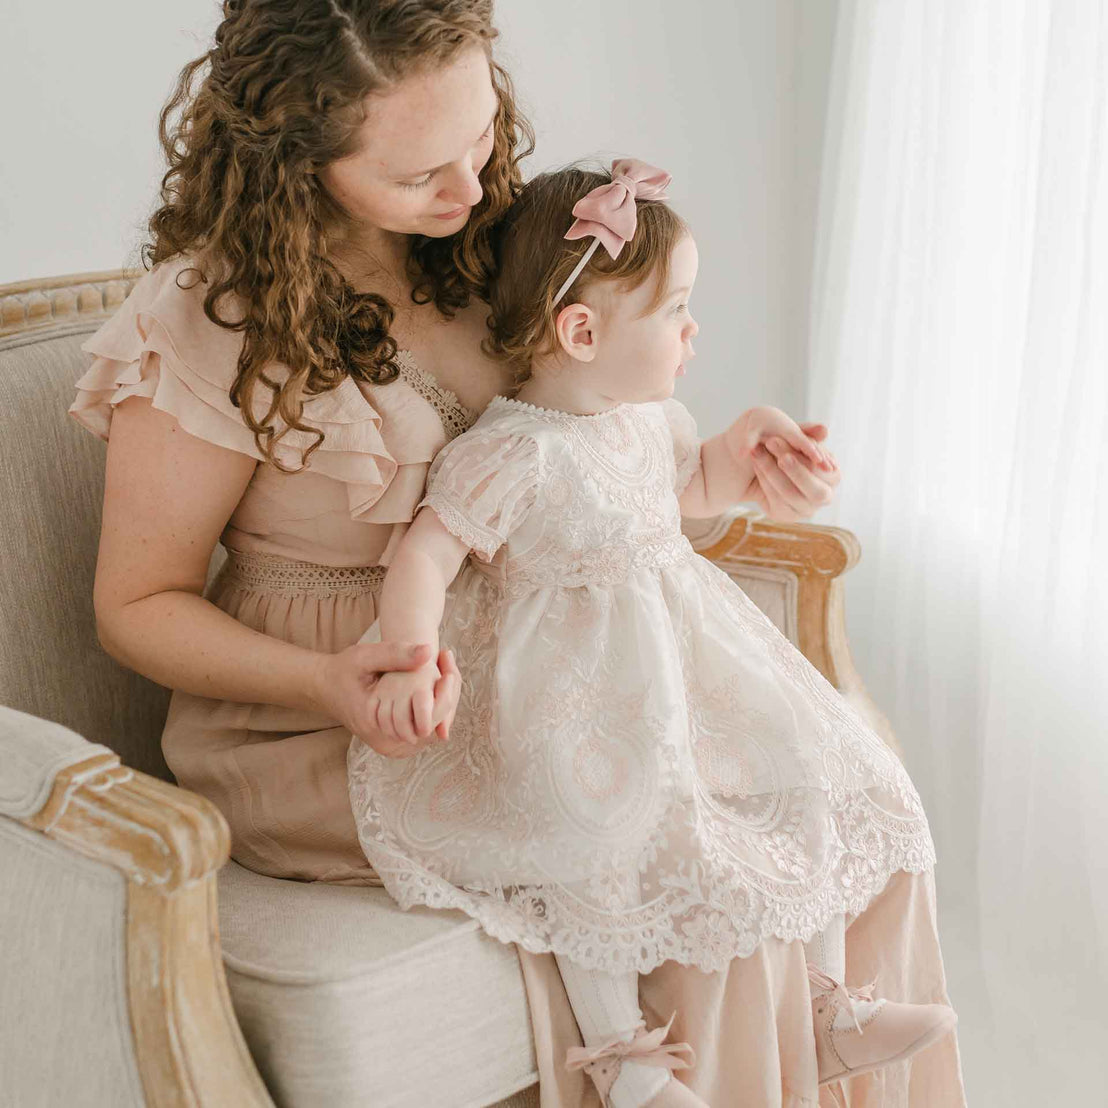 A mother with curly hair in a pink blouse and a toddler girl in an Elizabeth Christening Dress, sit together on an elegant vintage sofa in a bright room, sharing a tender moment